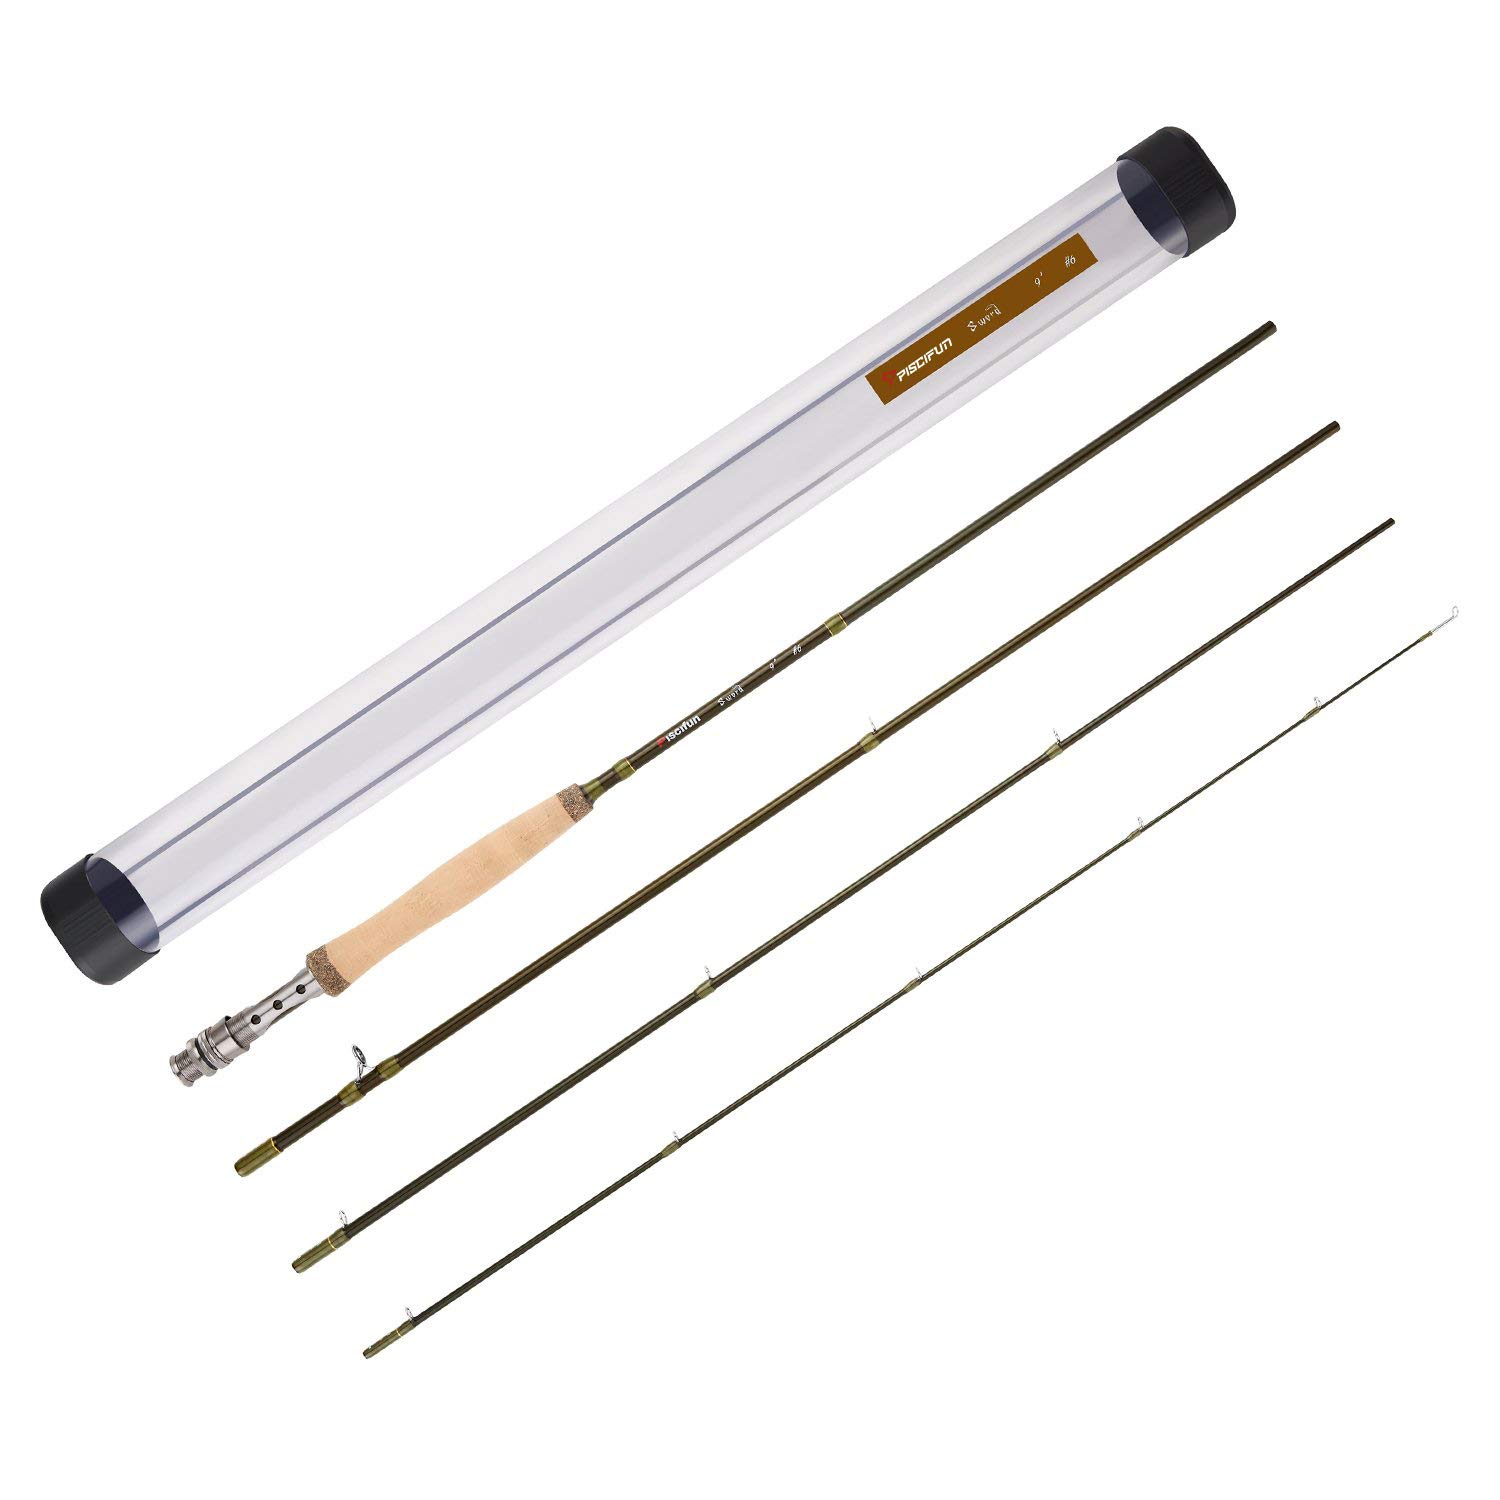 Piscifun Sword Fly Fishing Rod 4 Piece, 9ft Graphite and IM7